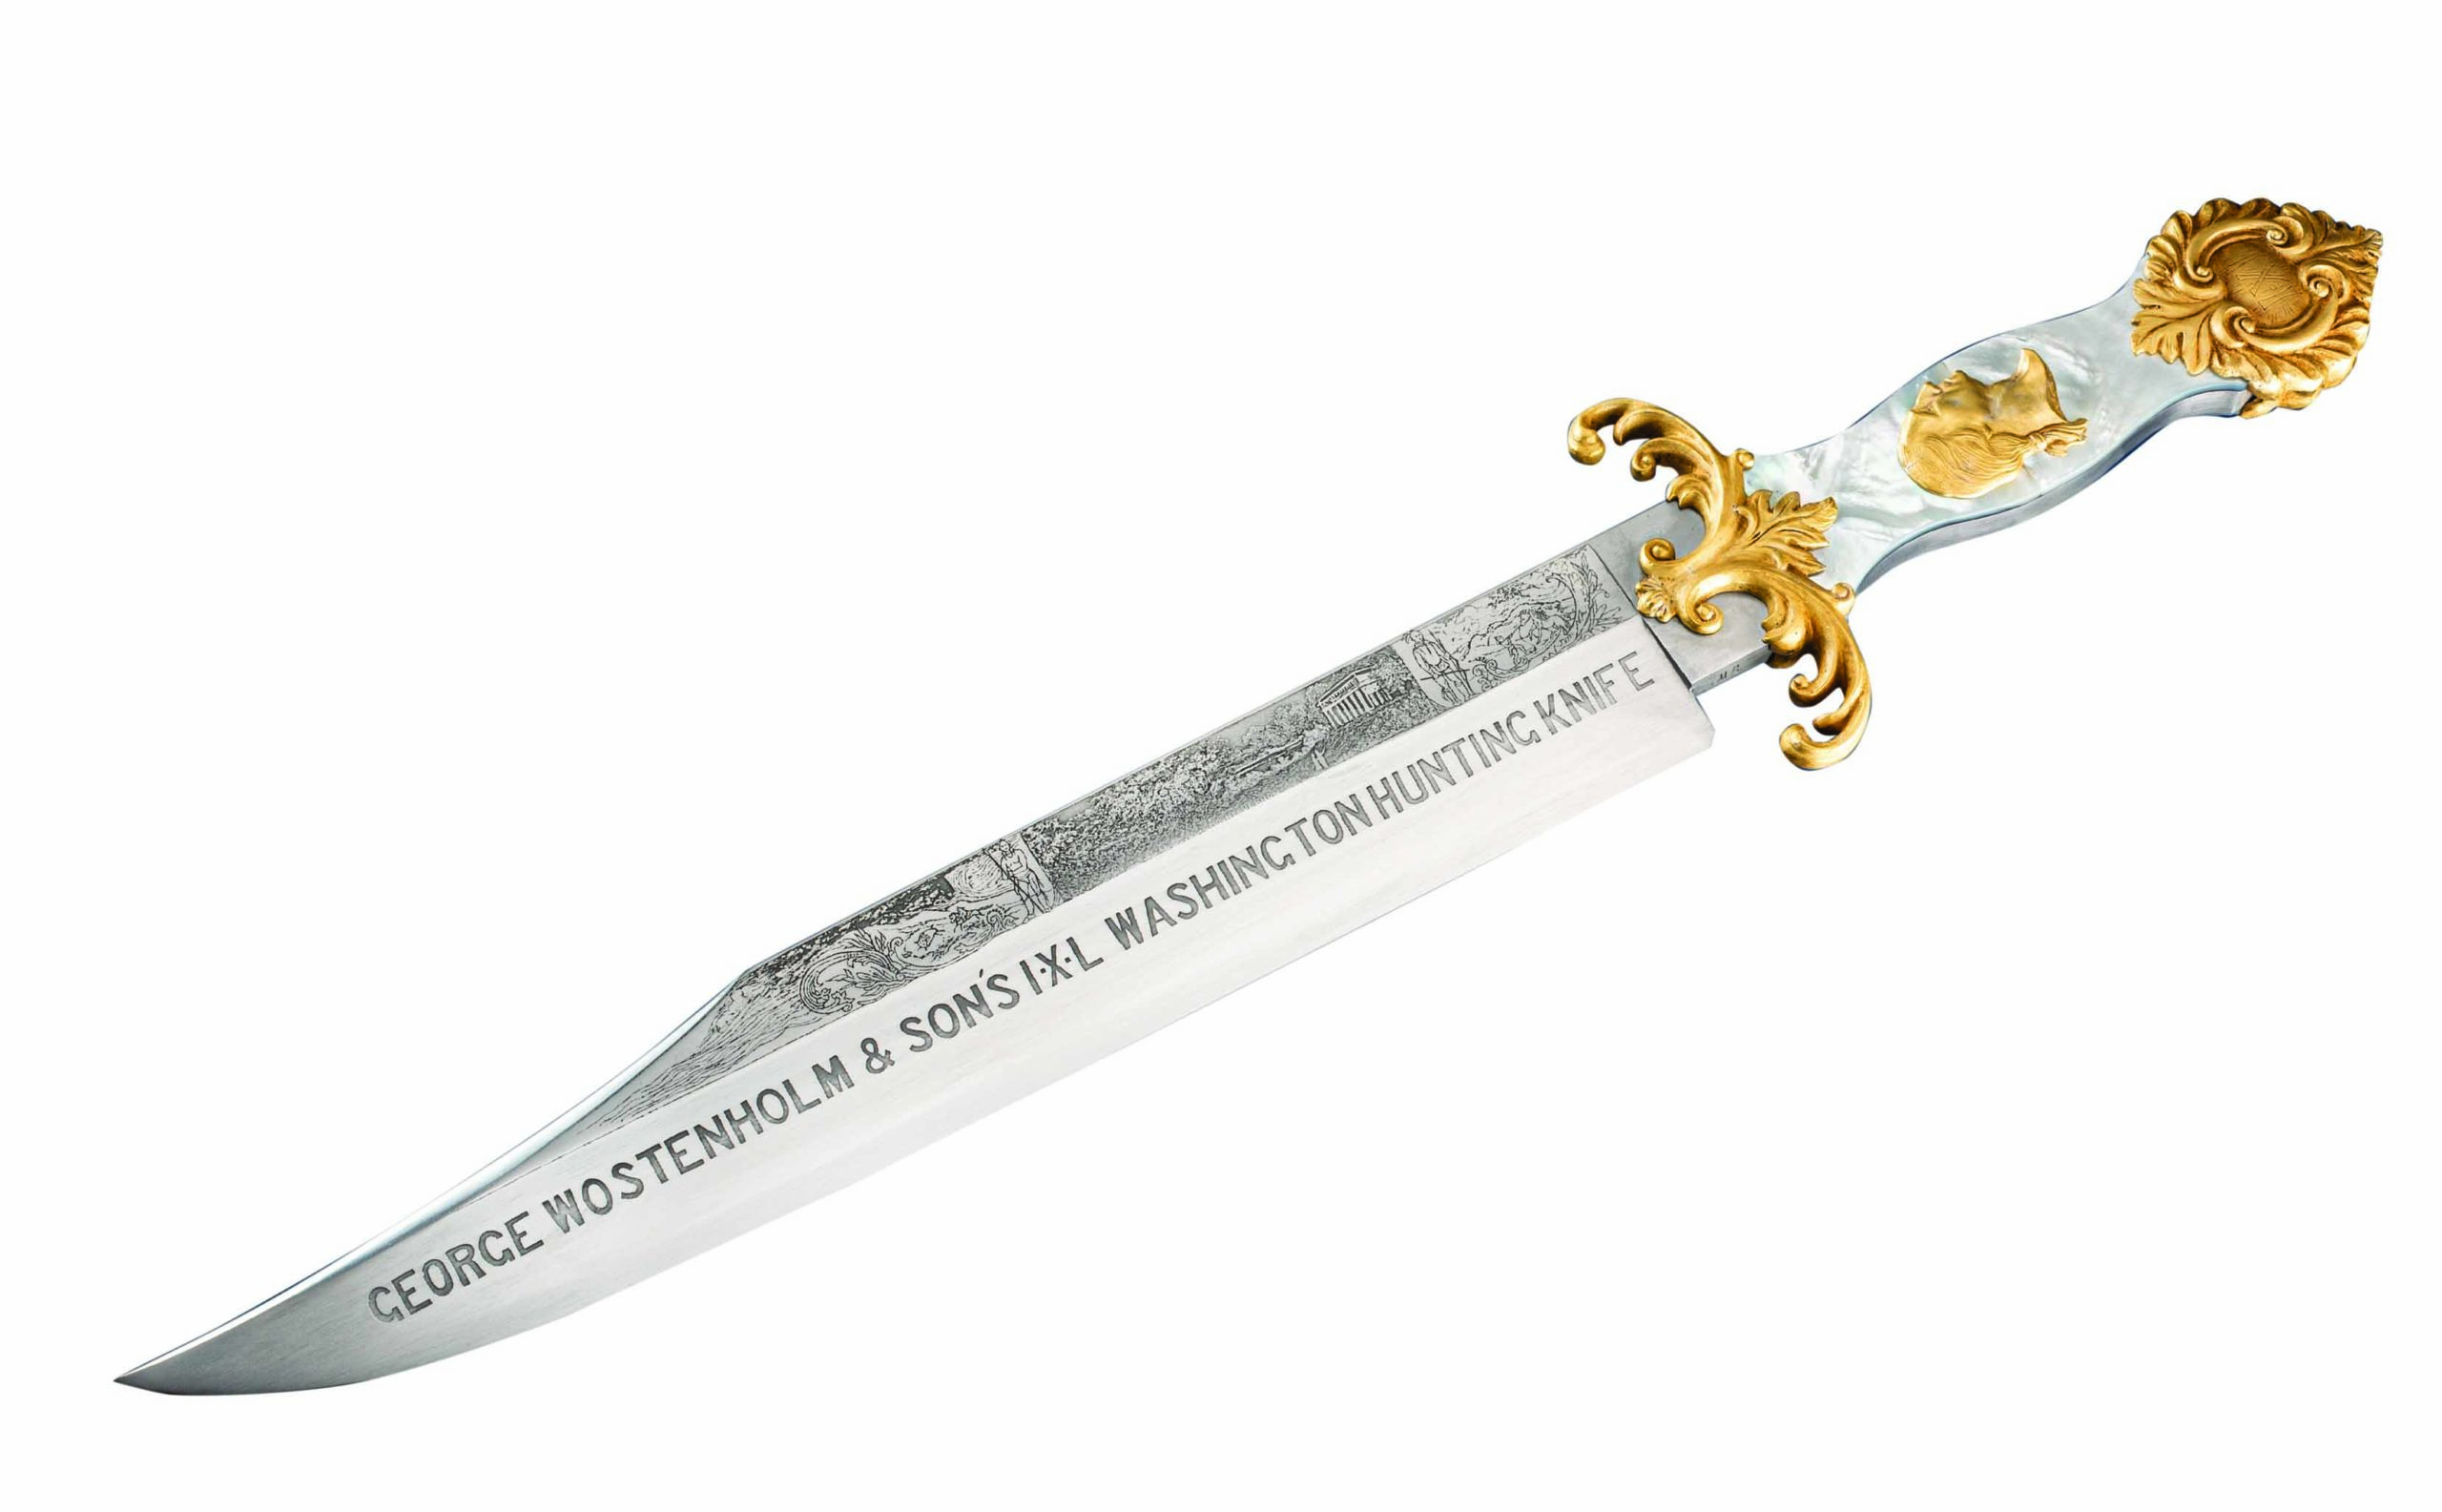 A period knife reproduction of the I*XL George Washington Hunting Knife by Doug Noren gets the full treatment in a 13.5-inch blade of 5160 carbon steel, a mother-of-pearl handle and 18k plated nickel silver. Overall length: 21.5 inches. (Whetstone Studio image)